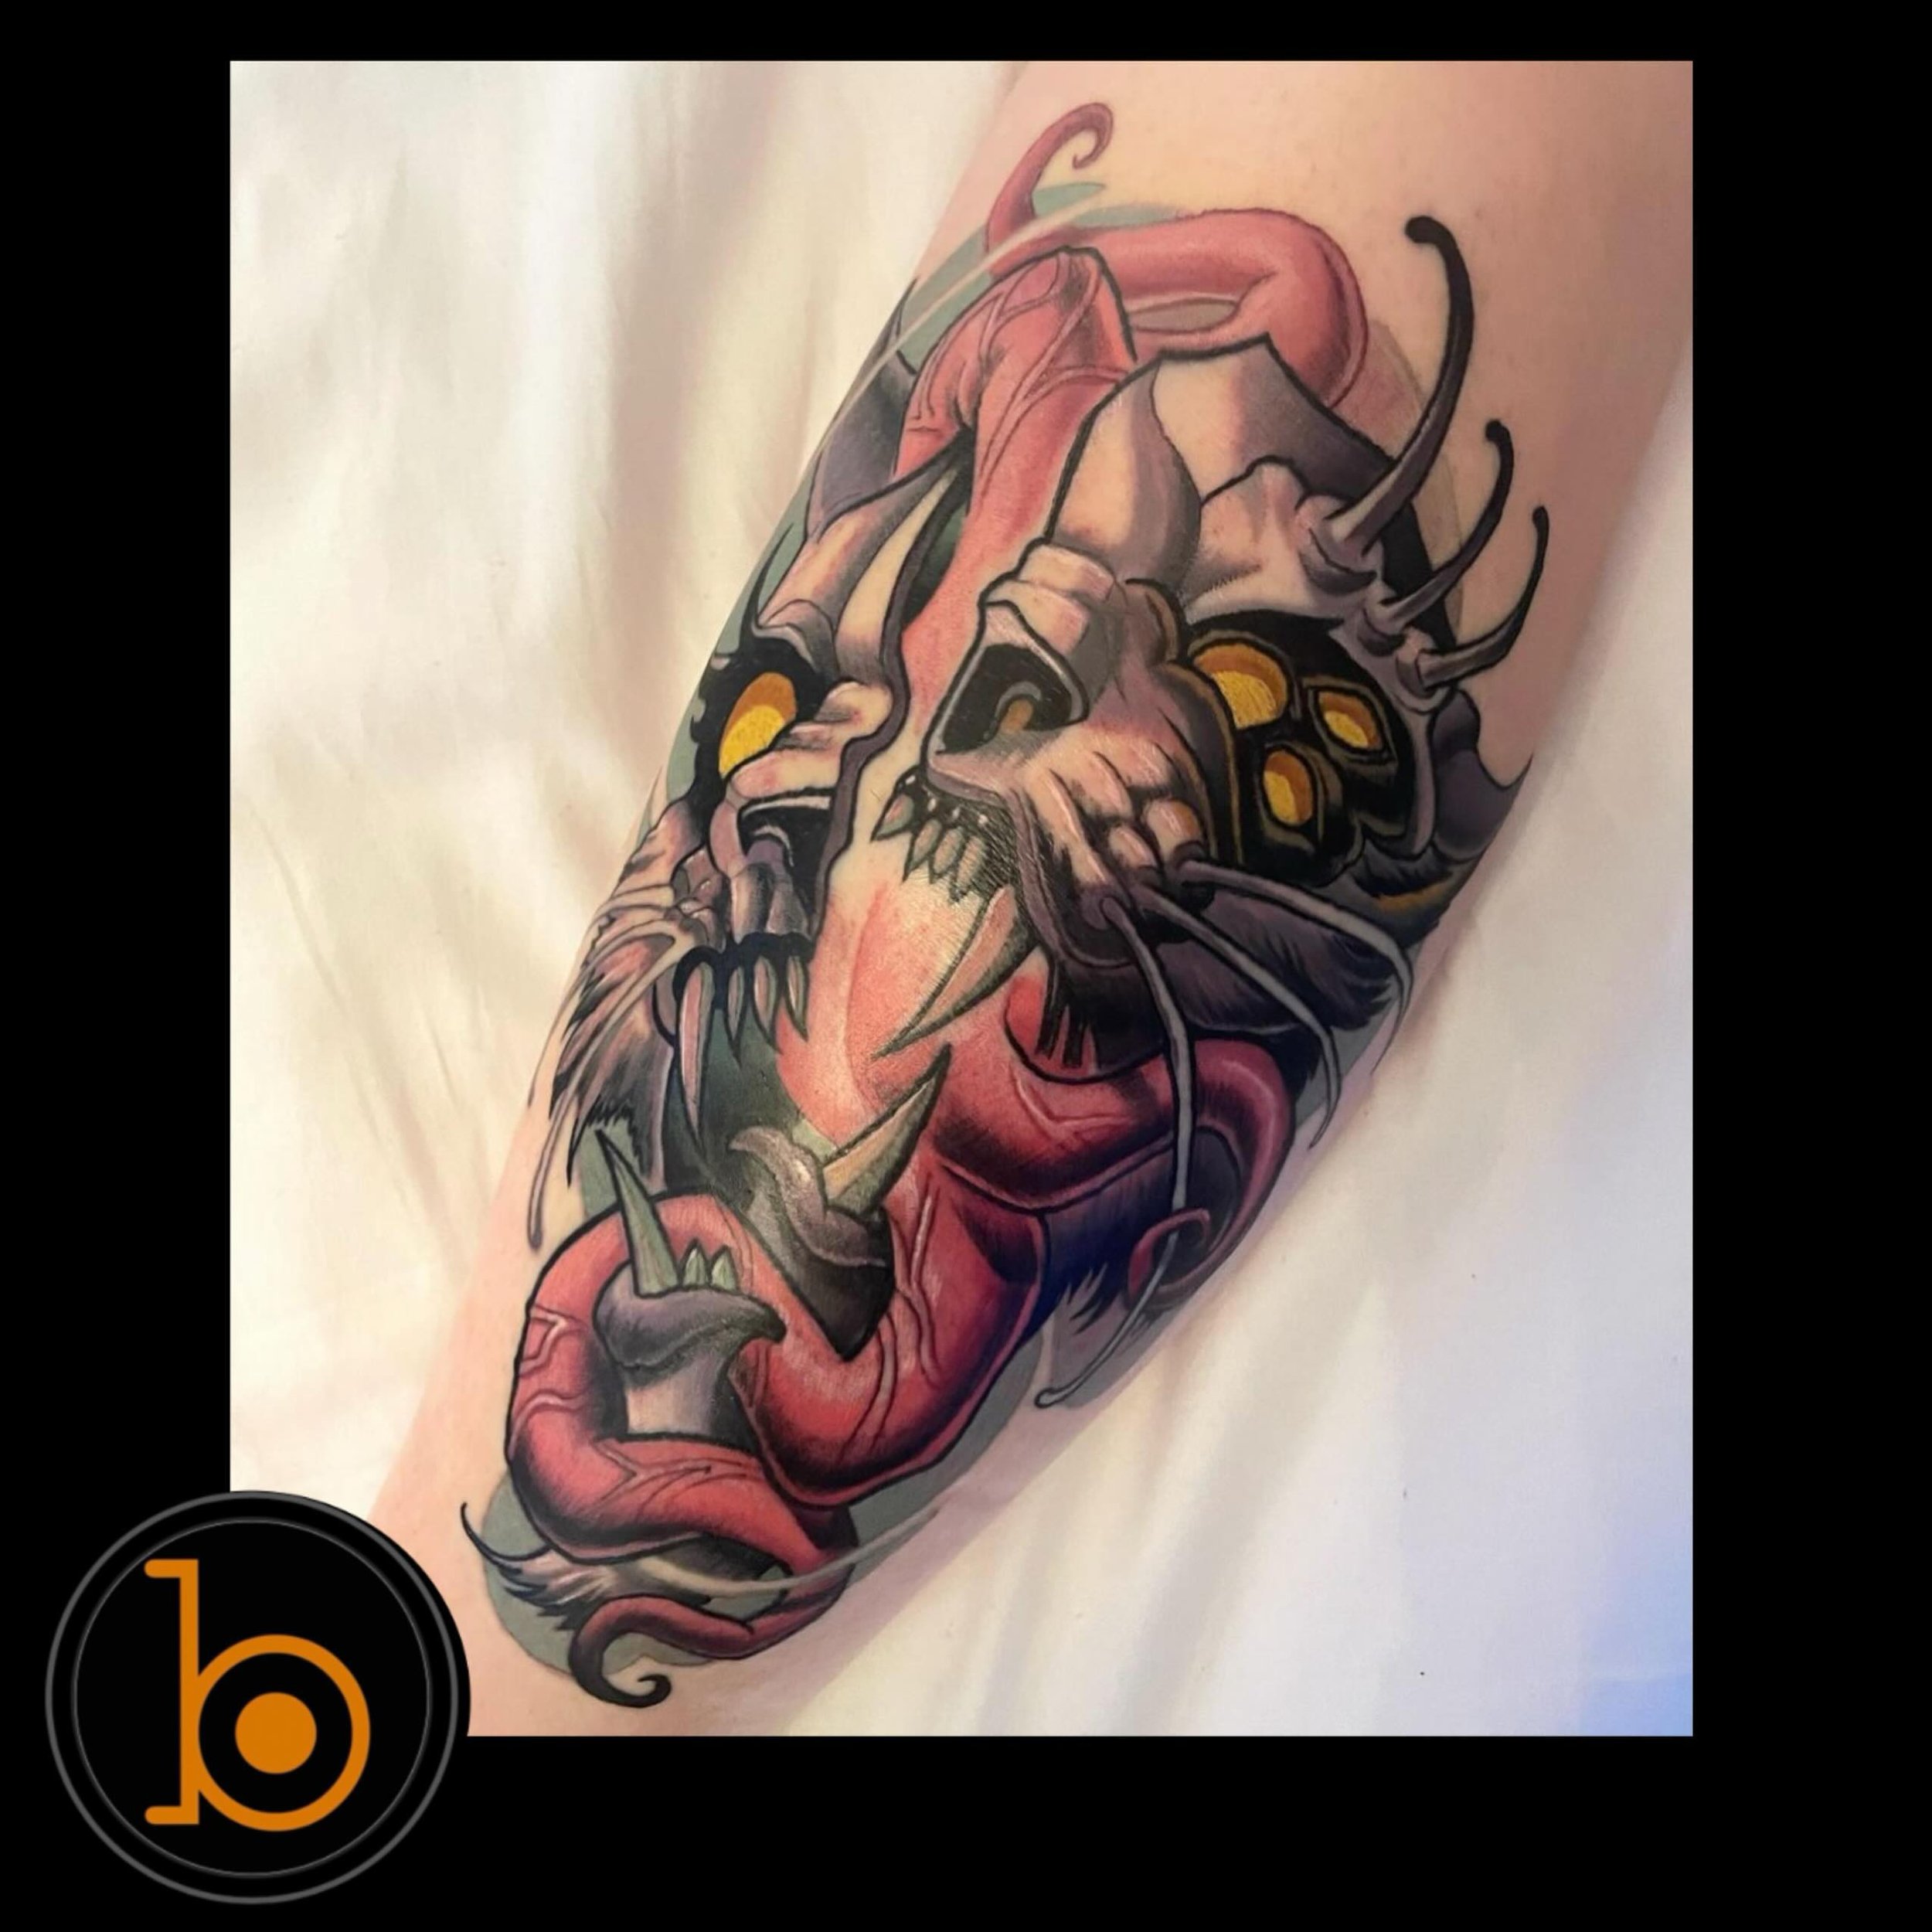 Mr. Whiskers by resident artist @oldmanfisk 🐱🪱
➖➖➖➖➖➖➖➖➖➖➖➖➖➖➖➖➖
Blueprint Gallery
138 Russell St
 Hadley MA 01035
📱(413)-387-0221 
WALK-INS WELCOME 
🕸️ www.blueprintgallery.com 🕸️
⬇️⬇️⬇️⬇️⬇️⬇️⬇️⬇️⬇️⬇️⬇️⬇️⬇️
Made using materials from:
🧴 @crybab